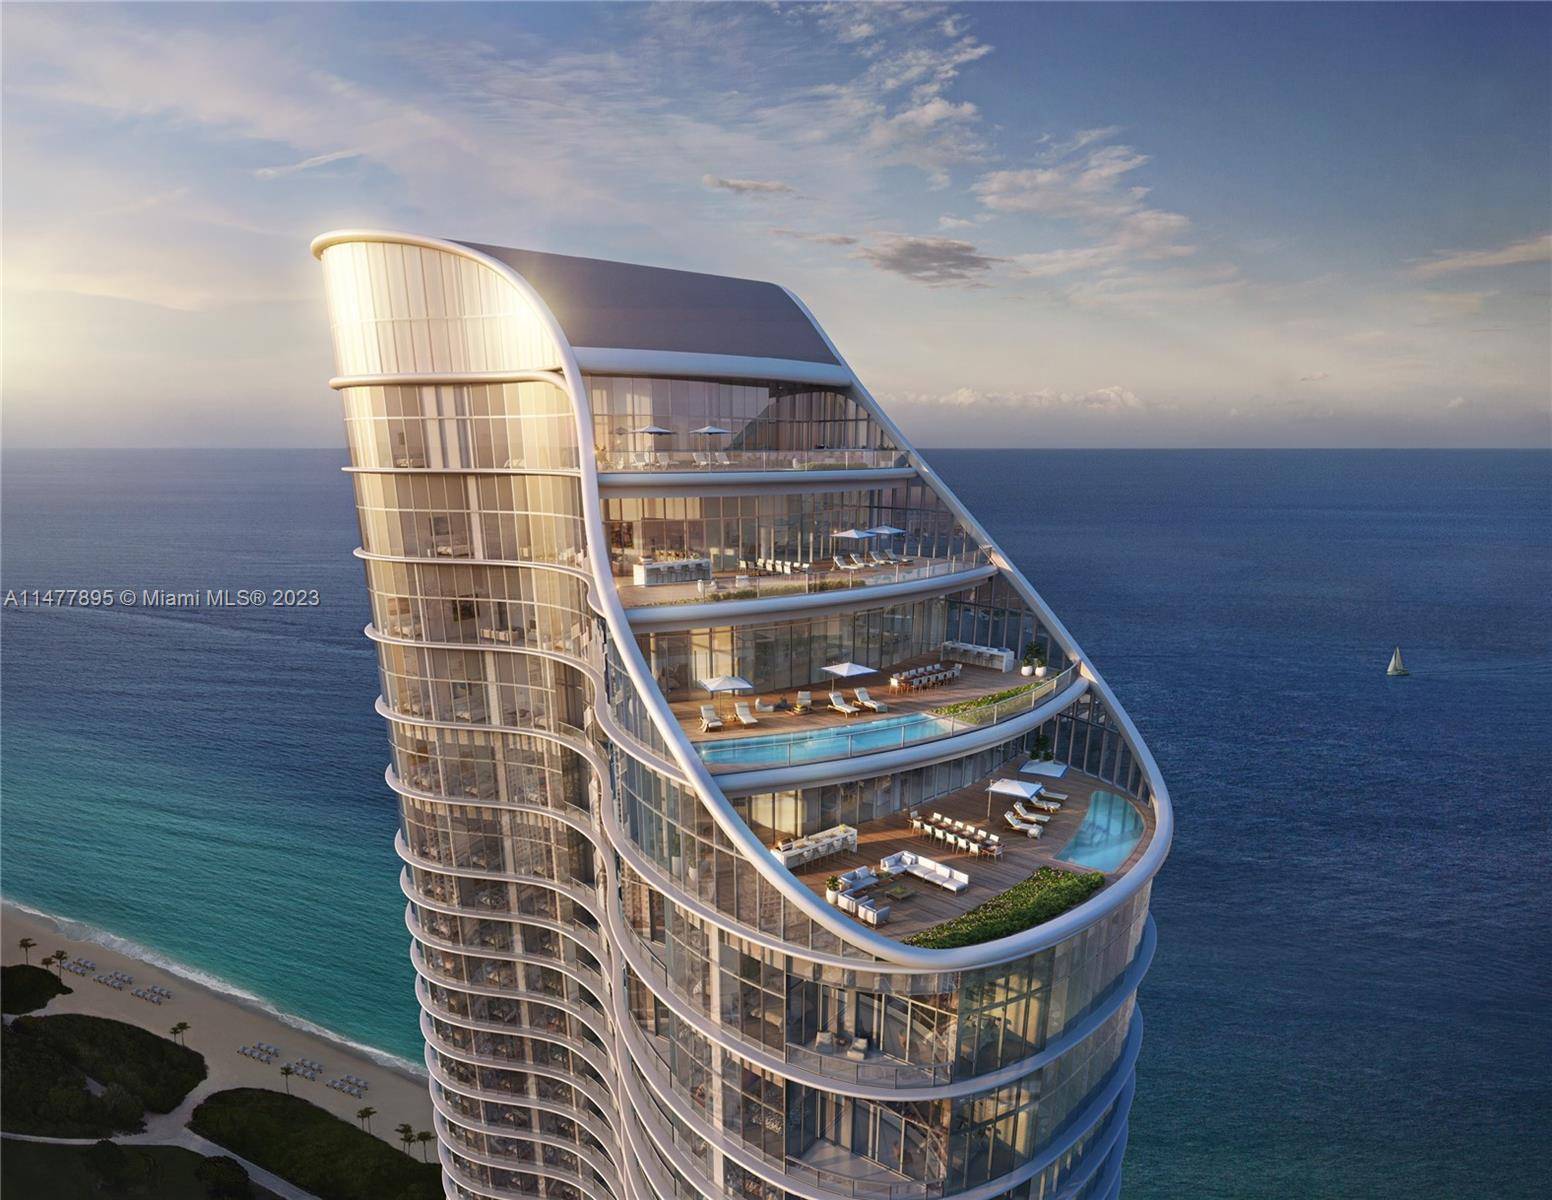 4 bedroom, 5. 5 bath residence with panoramic 270 degree east, south, and west views of the Atlantic Ocean, Intracoastal, Bay, and Miami skyline.